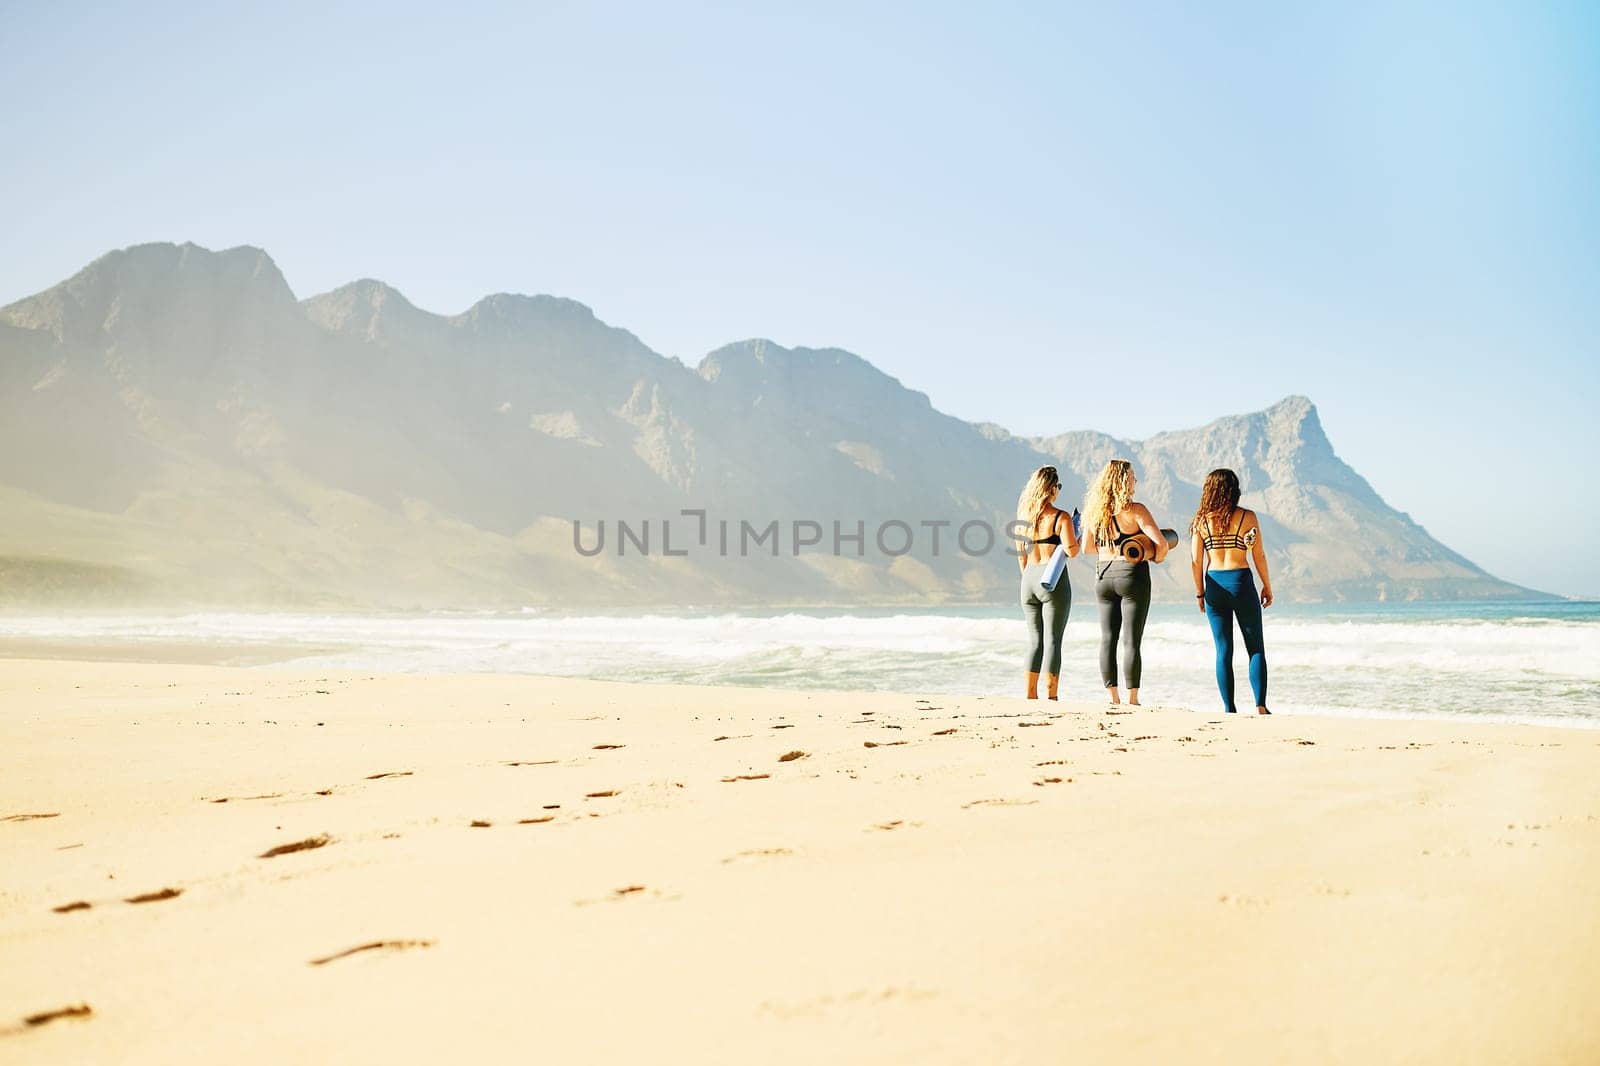 Yoga helps you maintain, recover or improve your health. Rearview shot of three young woman looking for a spot on the beach to practice yoga